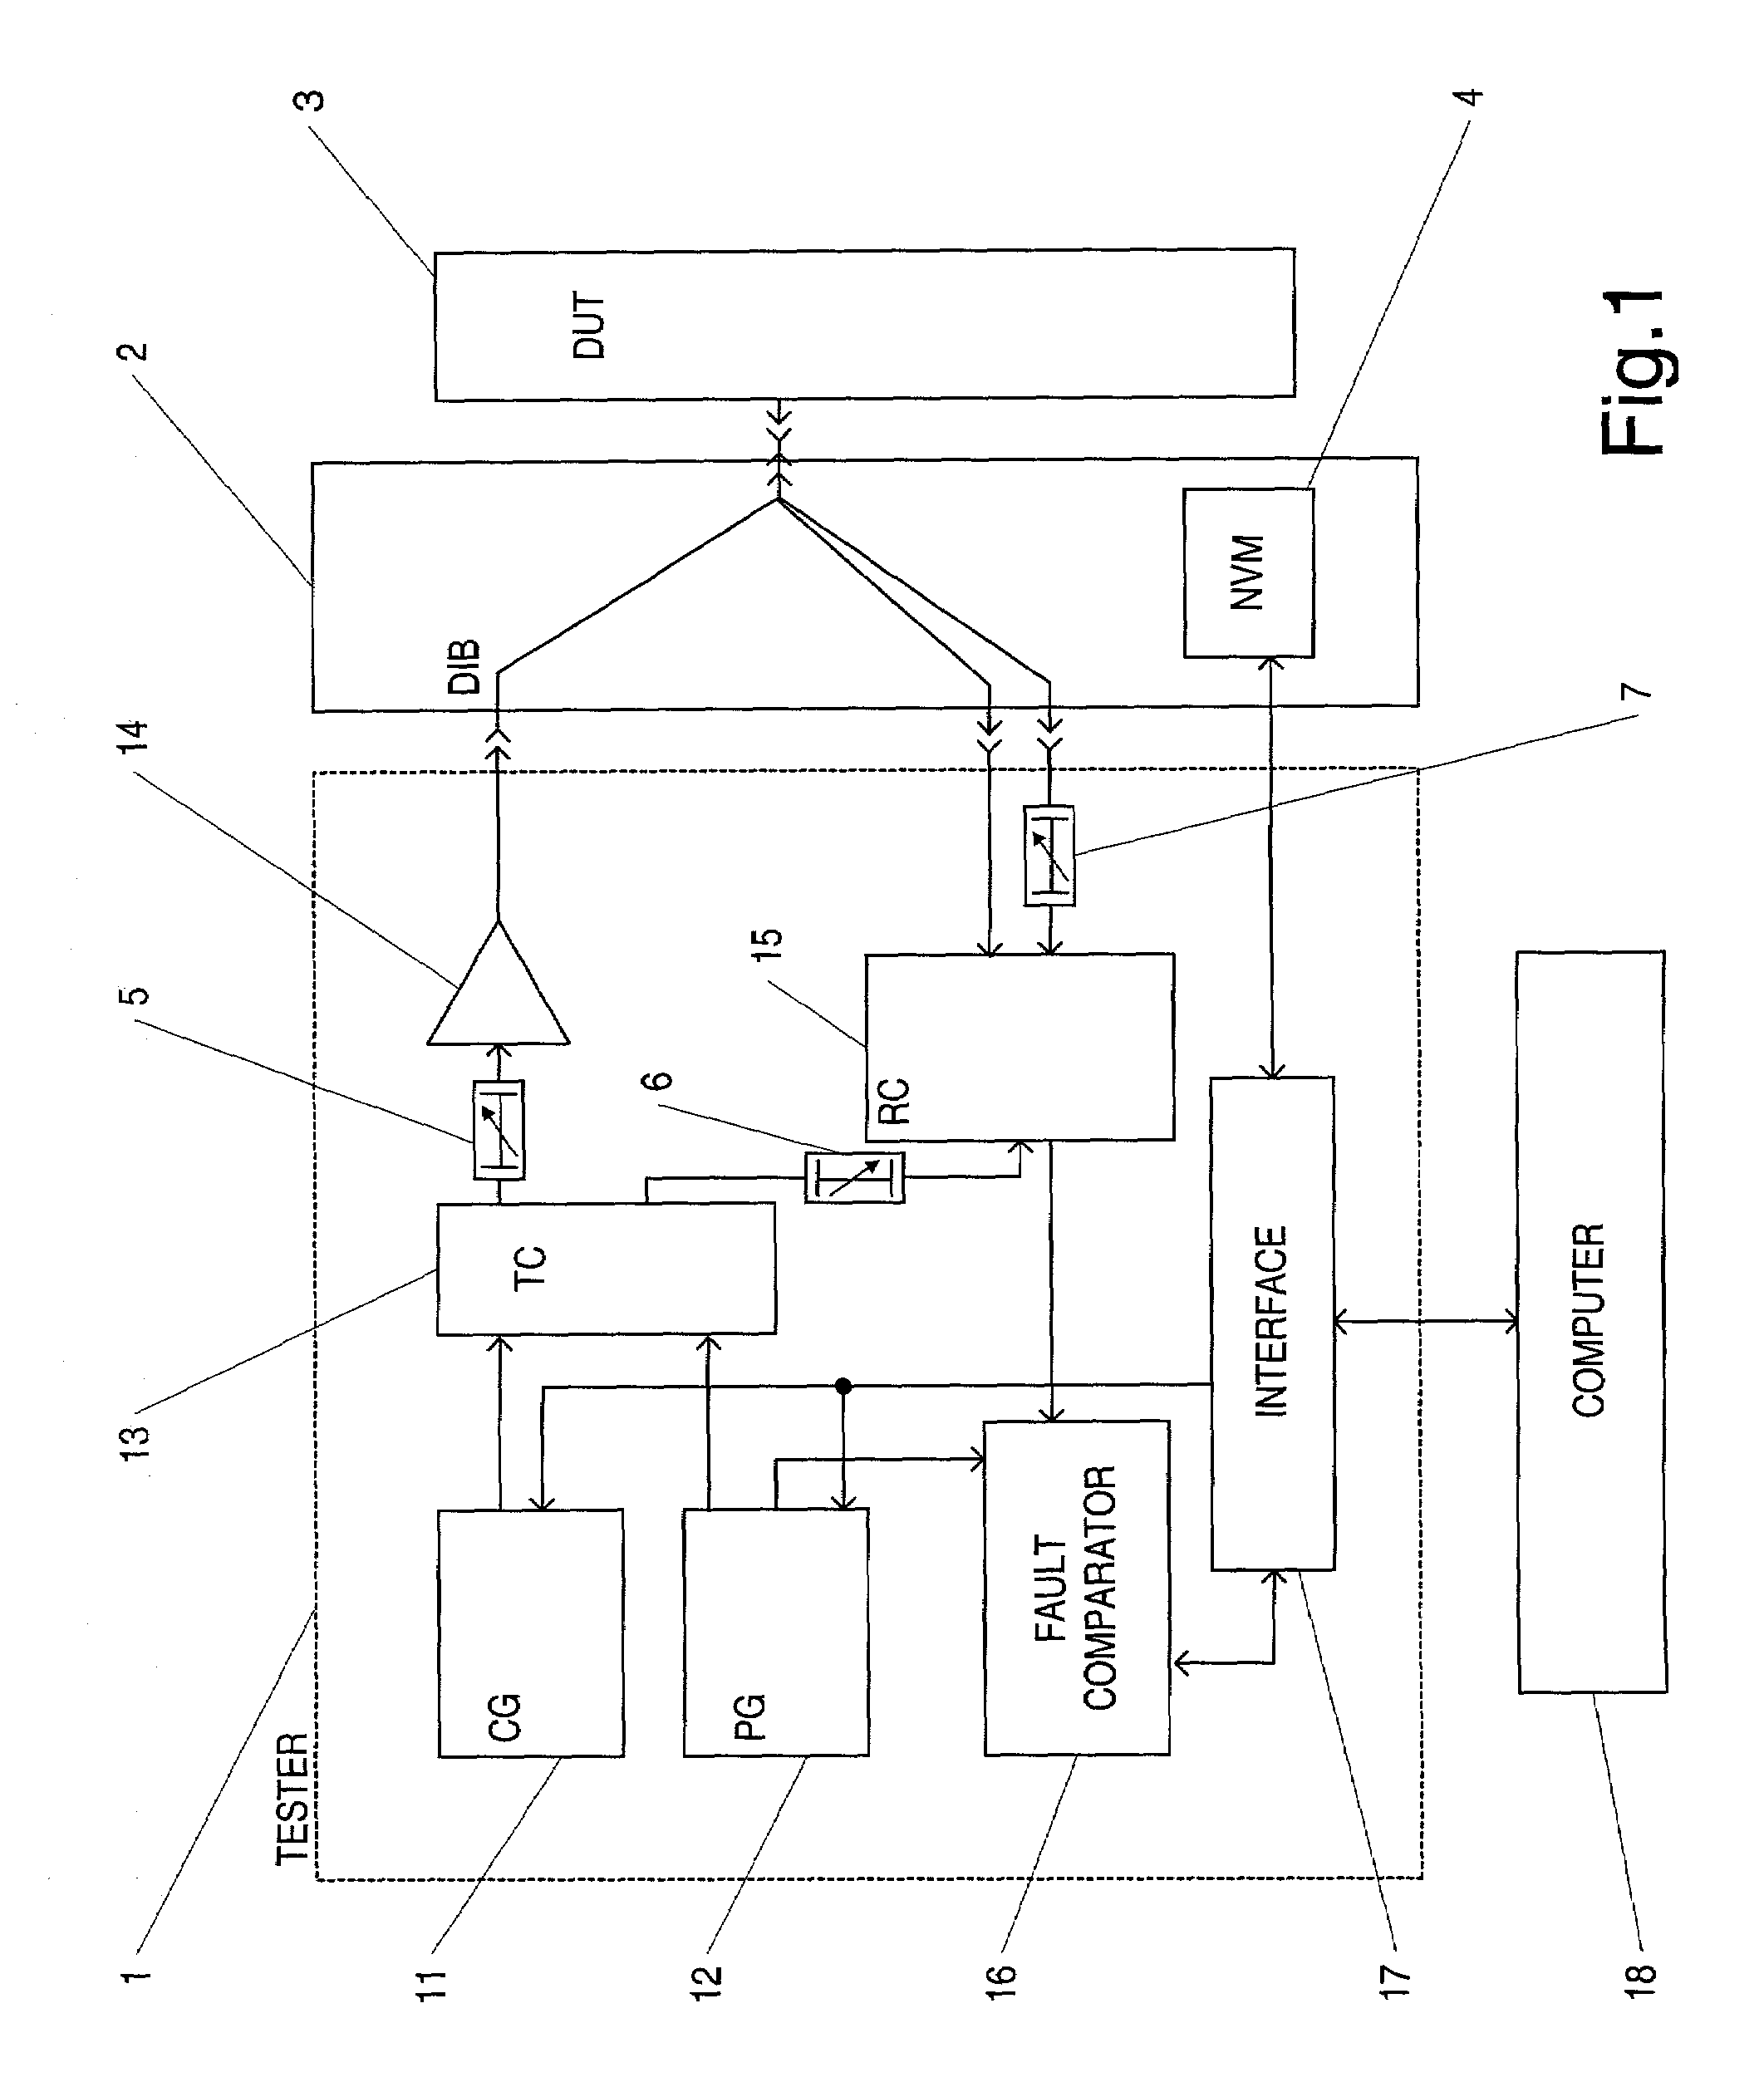 Interface device with stored data on transmission lines characteristics